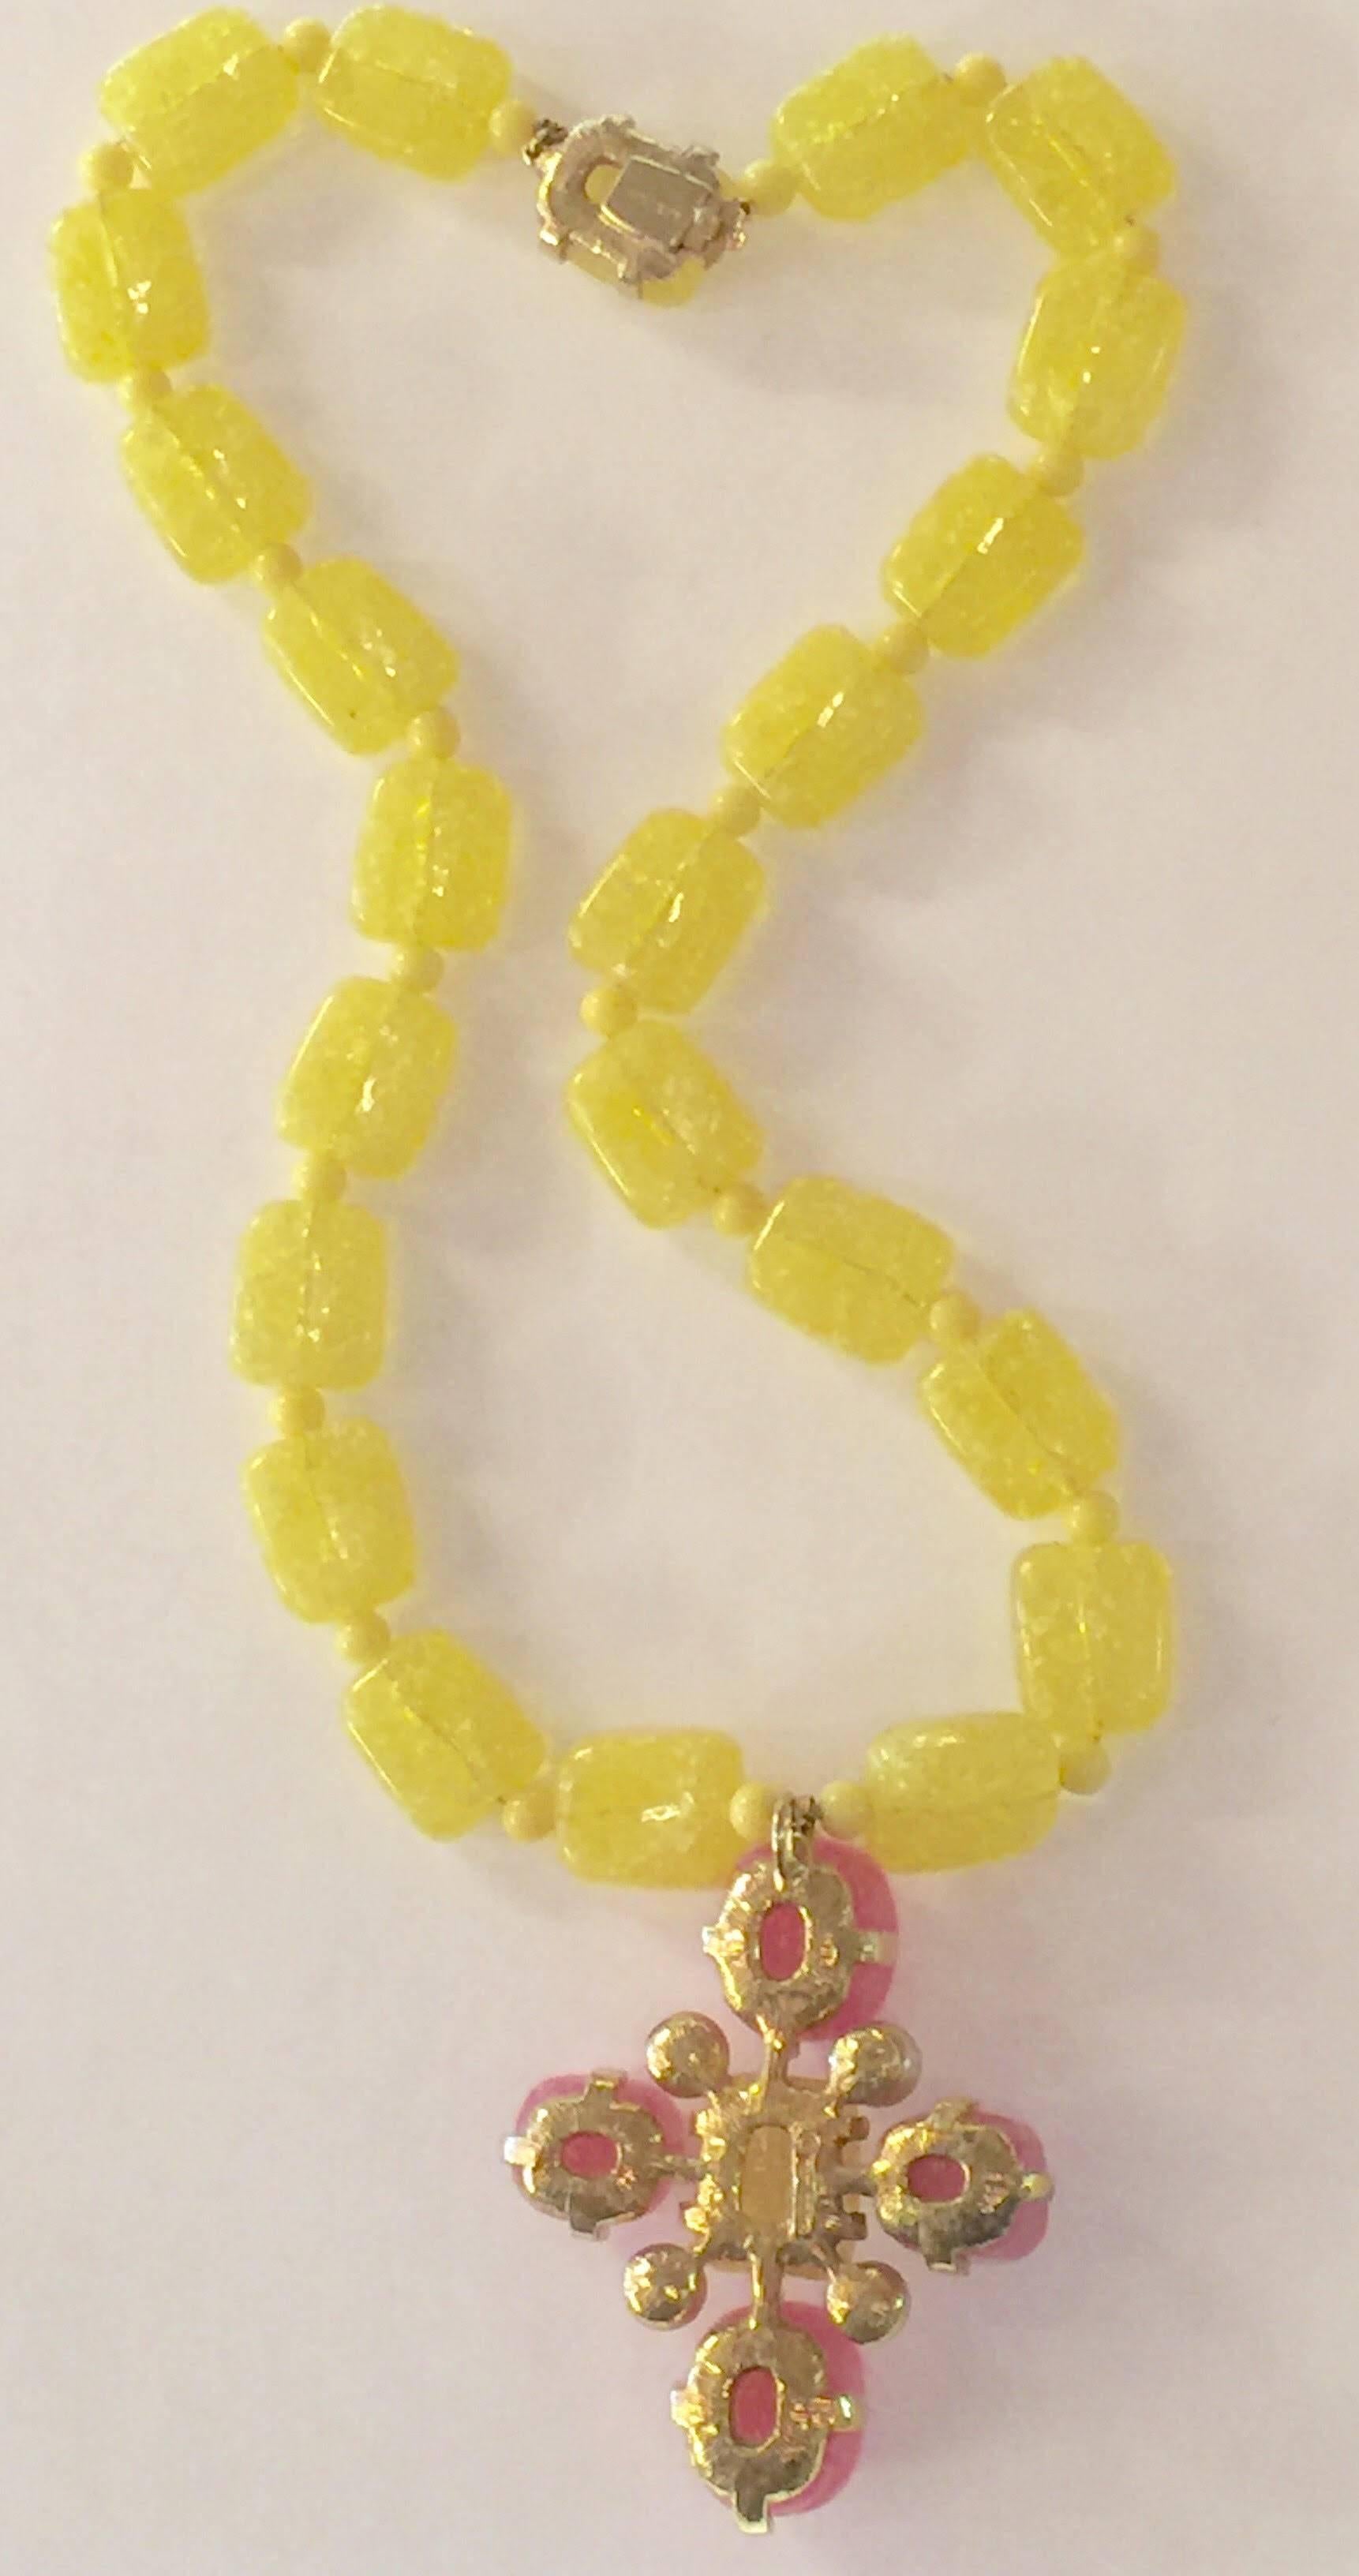  Vrba for Castlecliff Yellow and Pink Composite Resin Pendant Necklace  5